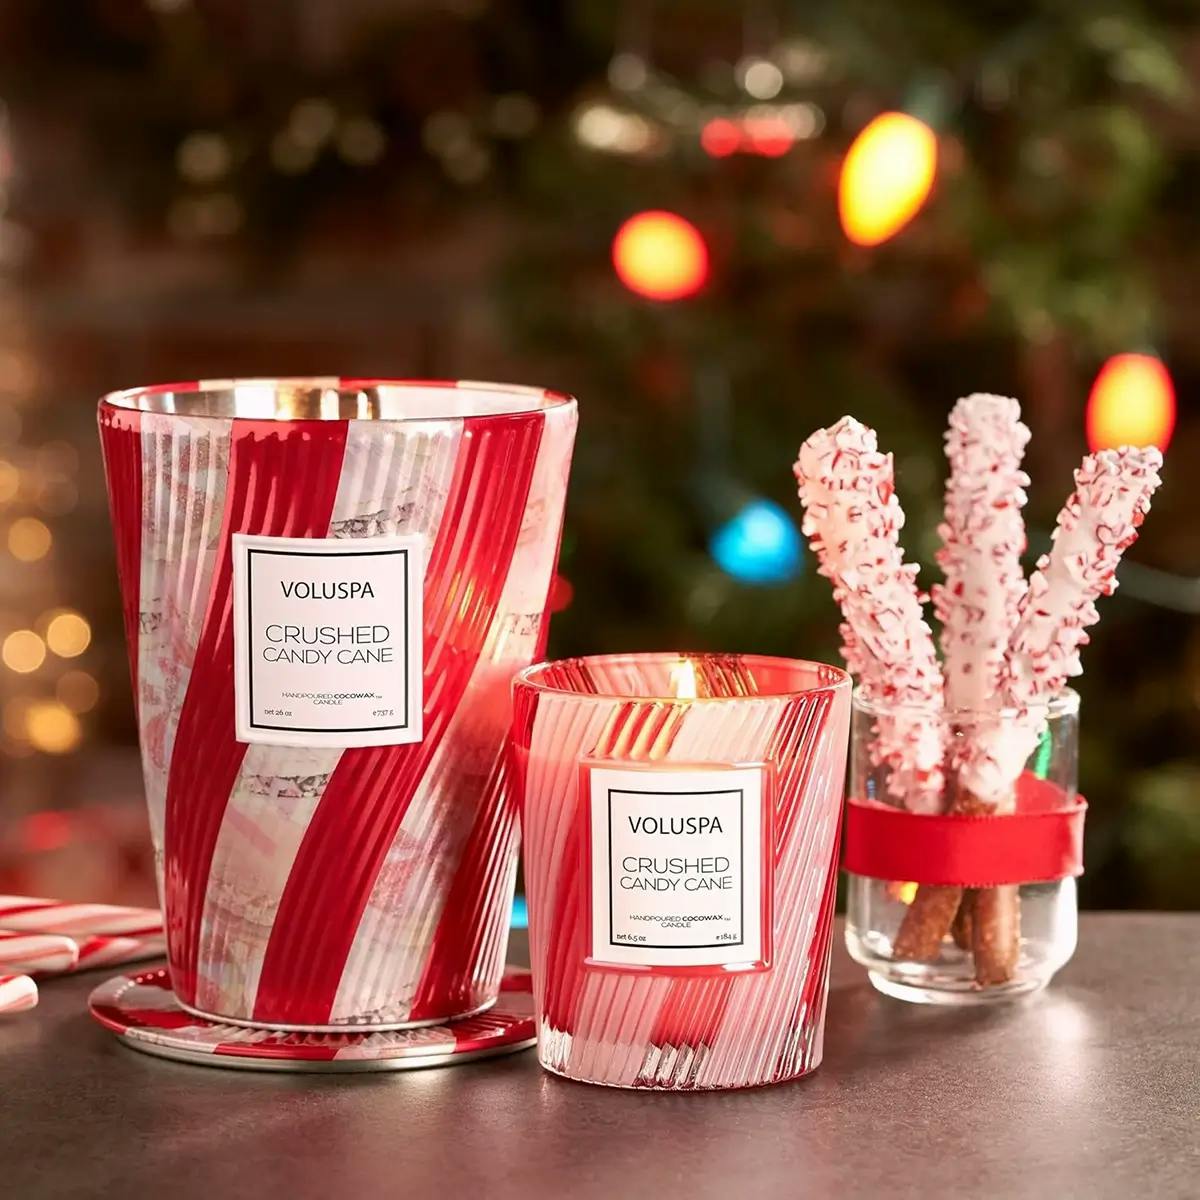 Two Voluspa Christmas candles scented like candy canes, with jars of peppermints and candy canes in the background.